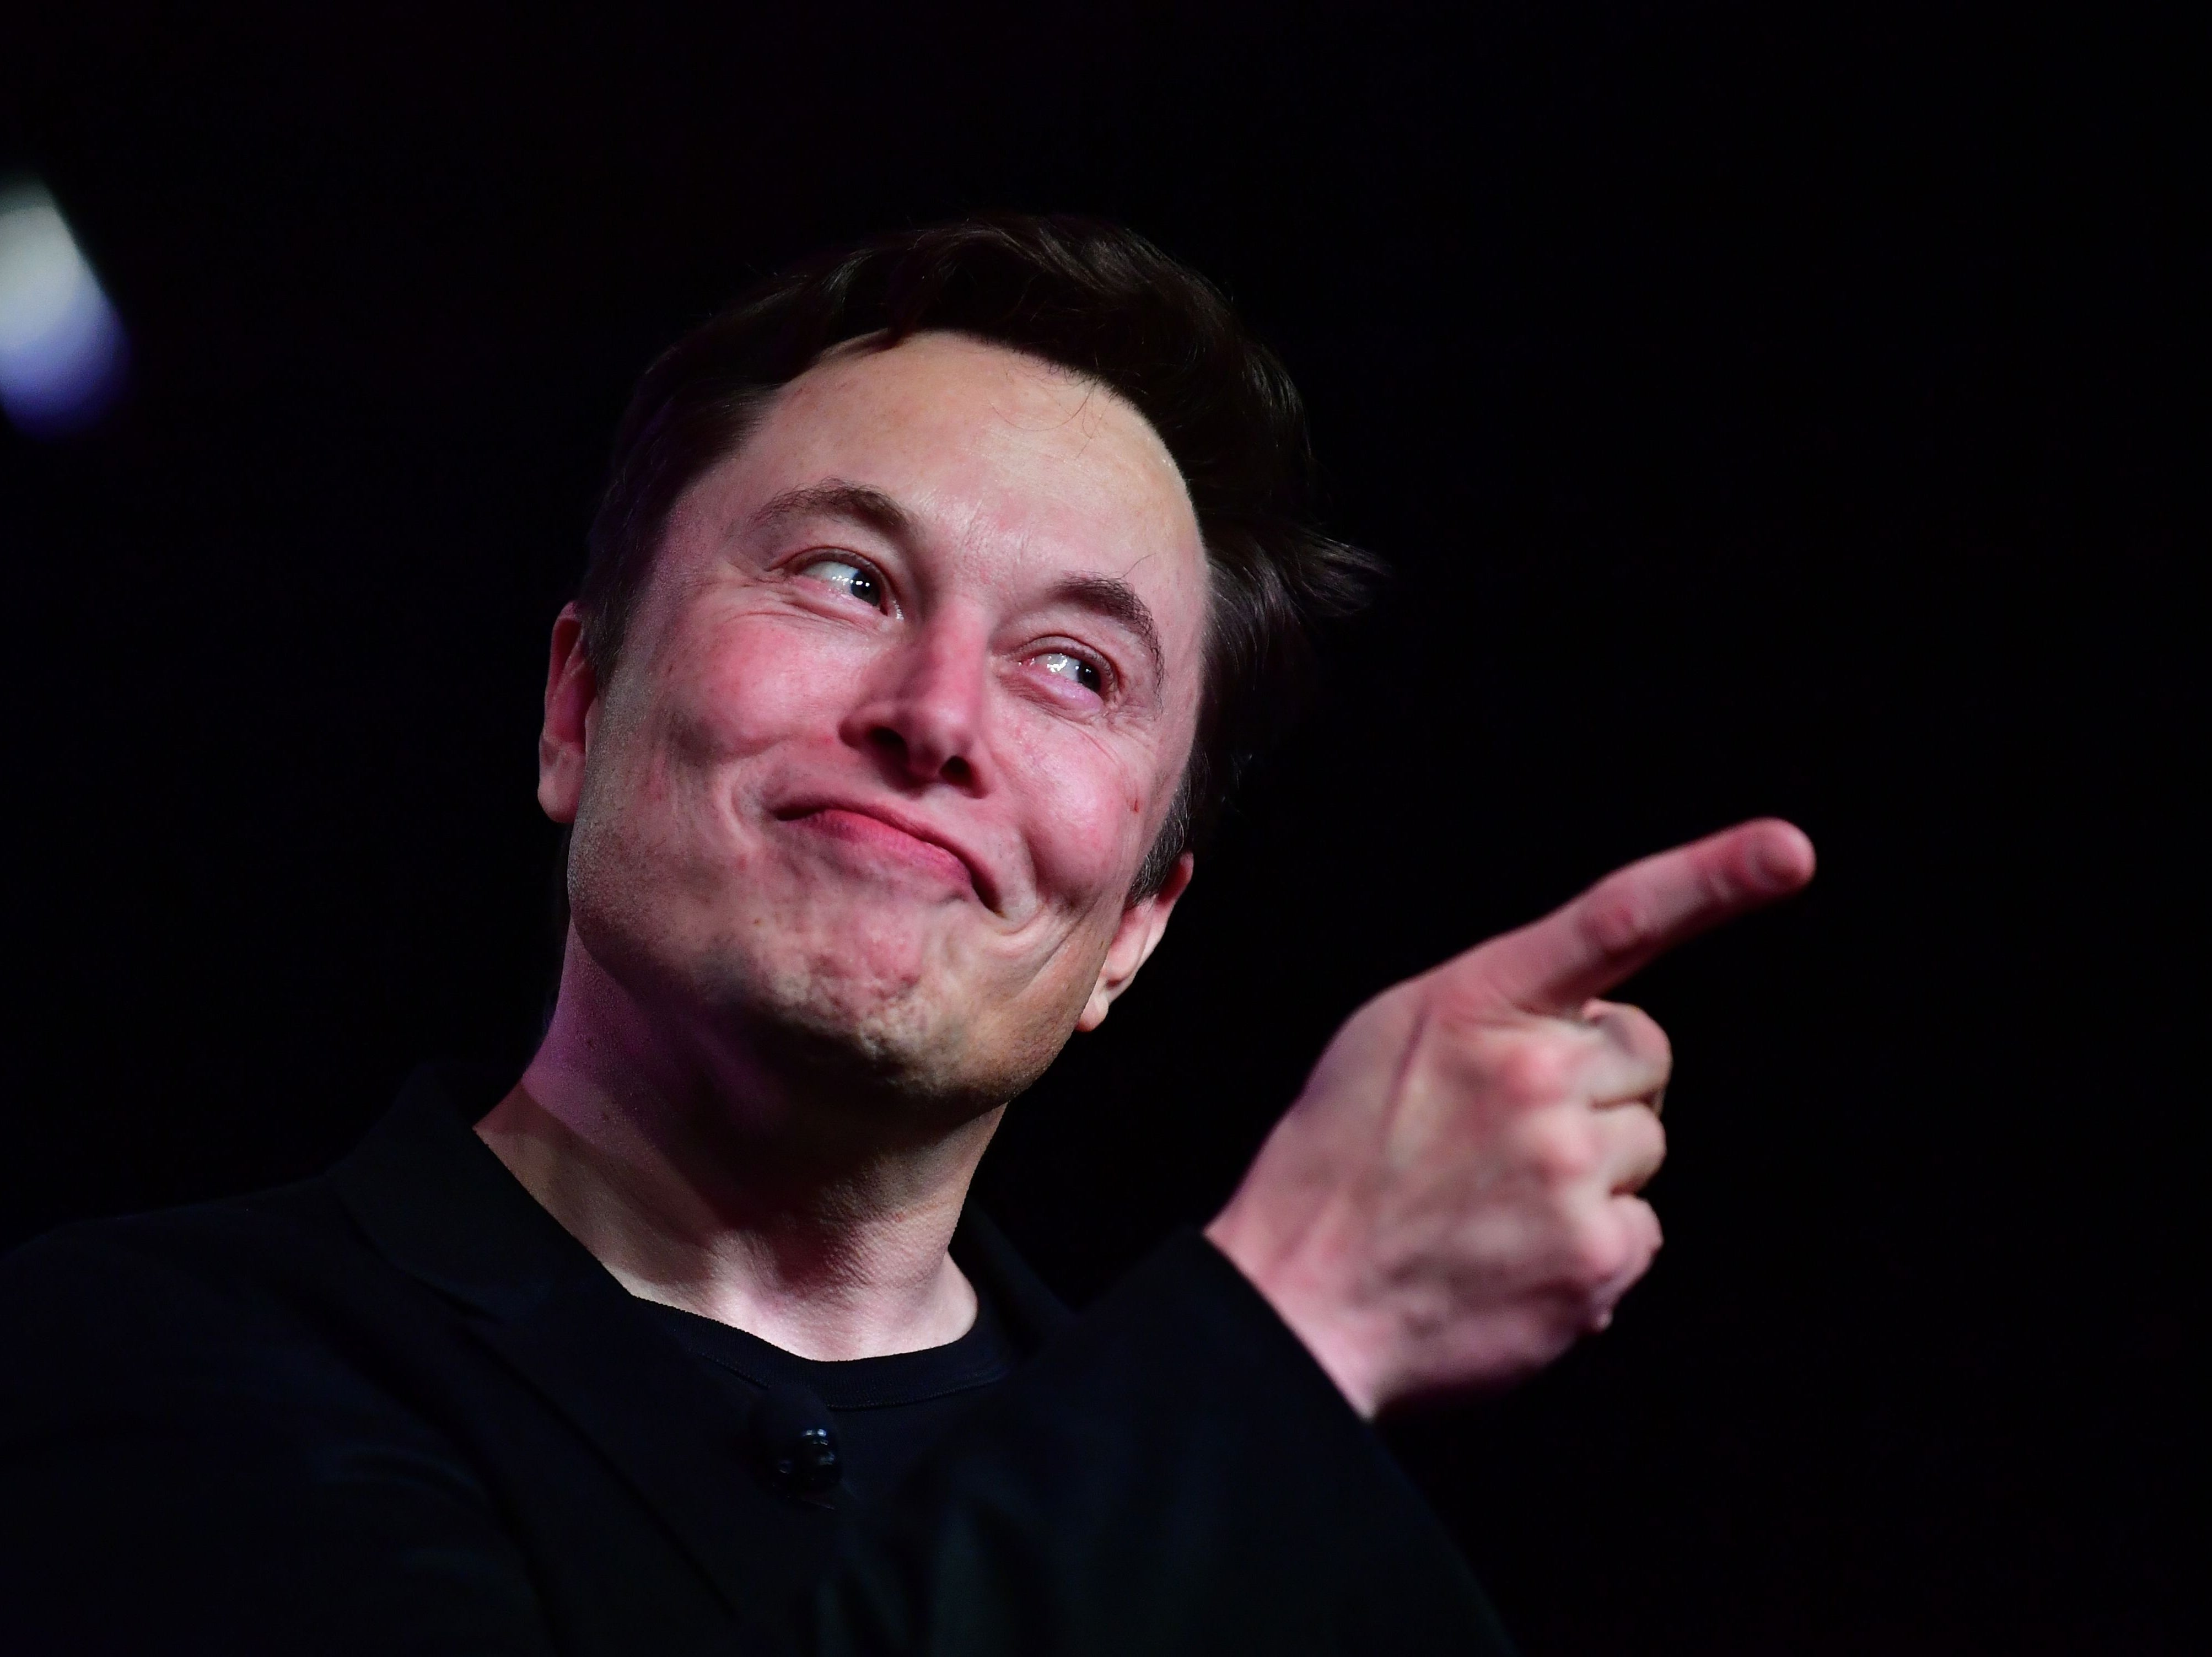 Elon Musk guest-presented the ‘Saturday Night Live’ this week